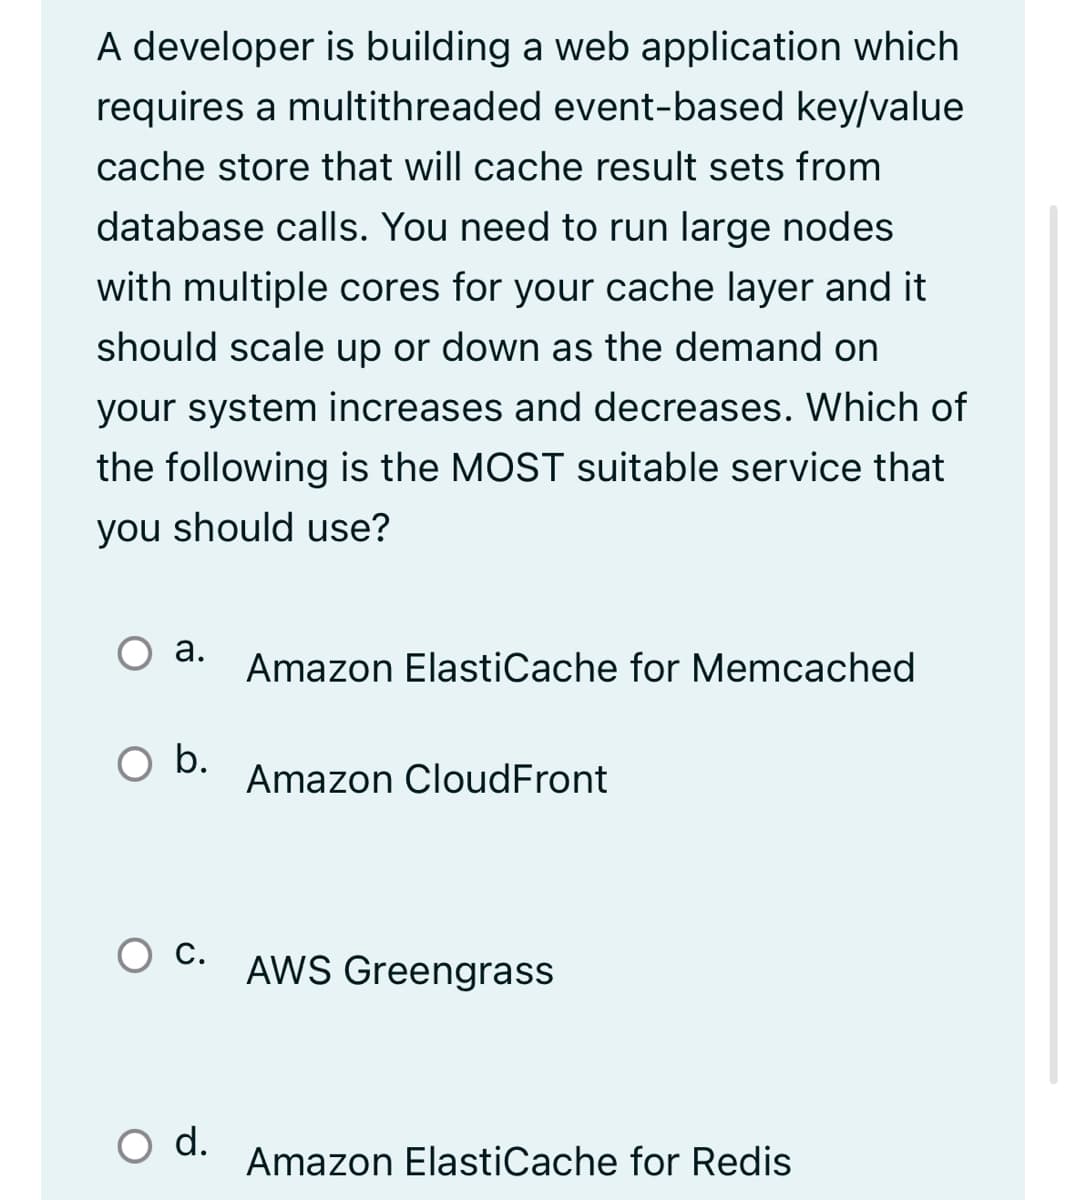 A developer is building a web application which
requires a multithreaded event-based key/value
cache store that will cache result sets from
database calls. You need to run large nodes
with multiple cores for your cache layer and it
should scale up or down as the demand on
your system increases and decreases. Which of
the following is the MOST suitable service that
you should use?
а.
Amazon ElastiCache for Memcached
b.
Amazon CloudFront
C. AWS Greengrass
С.
d.
Amazon ElastiCache for Redis
